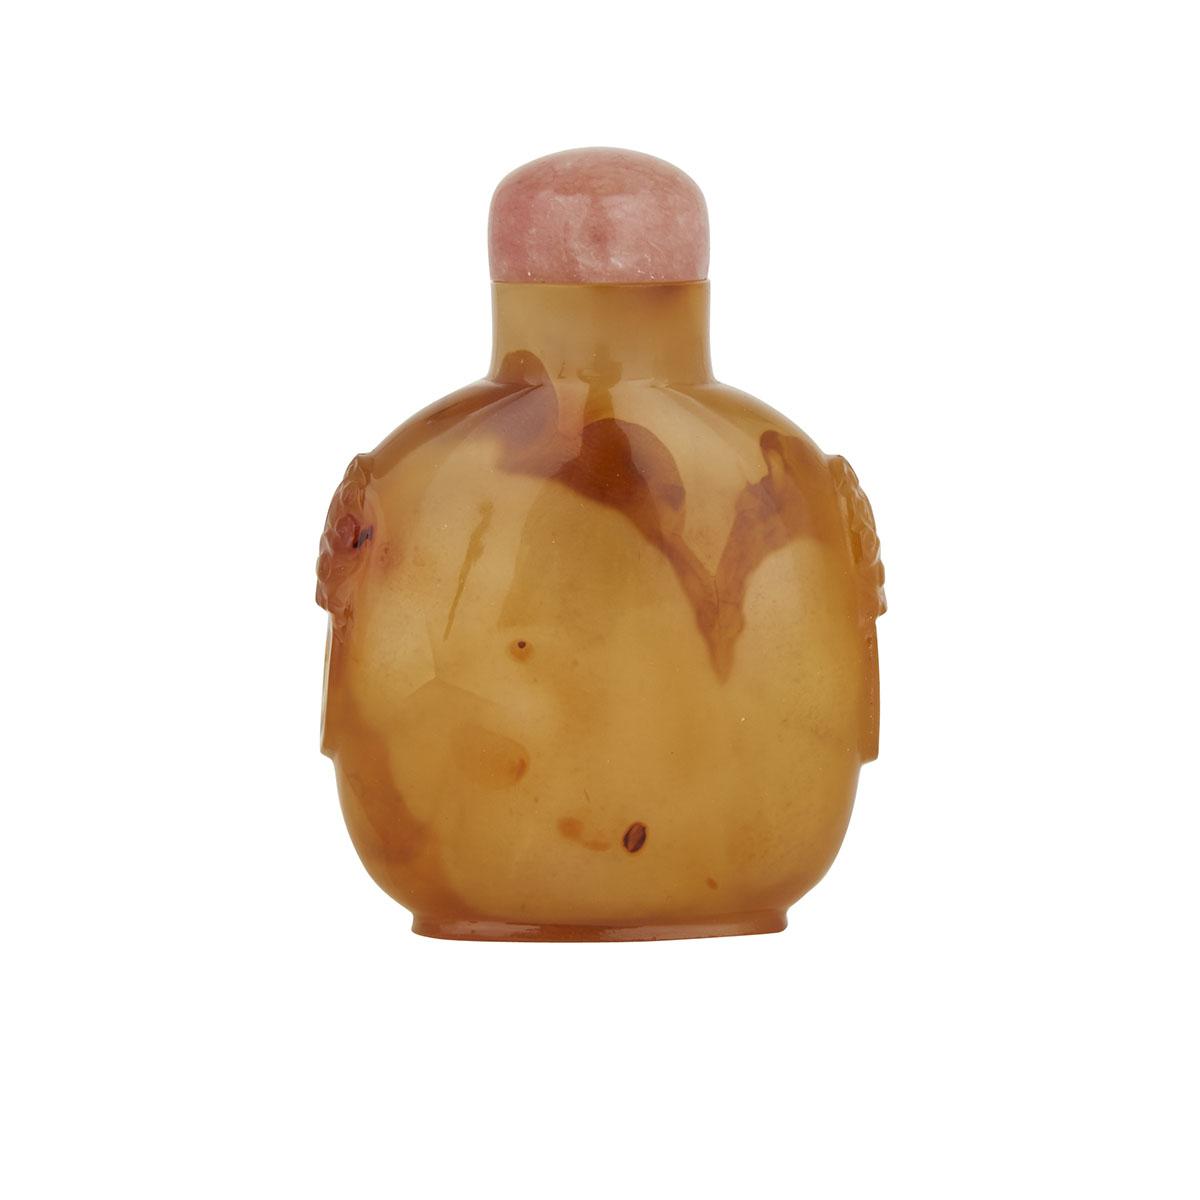 A SHADOW AGATE SNUFF BOTTLE, 19TH CENTURY 清十九世紀 皮影瑪瑙鼻煙壺 Of rounded square form and supported on an - Image 2 of 2